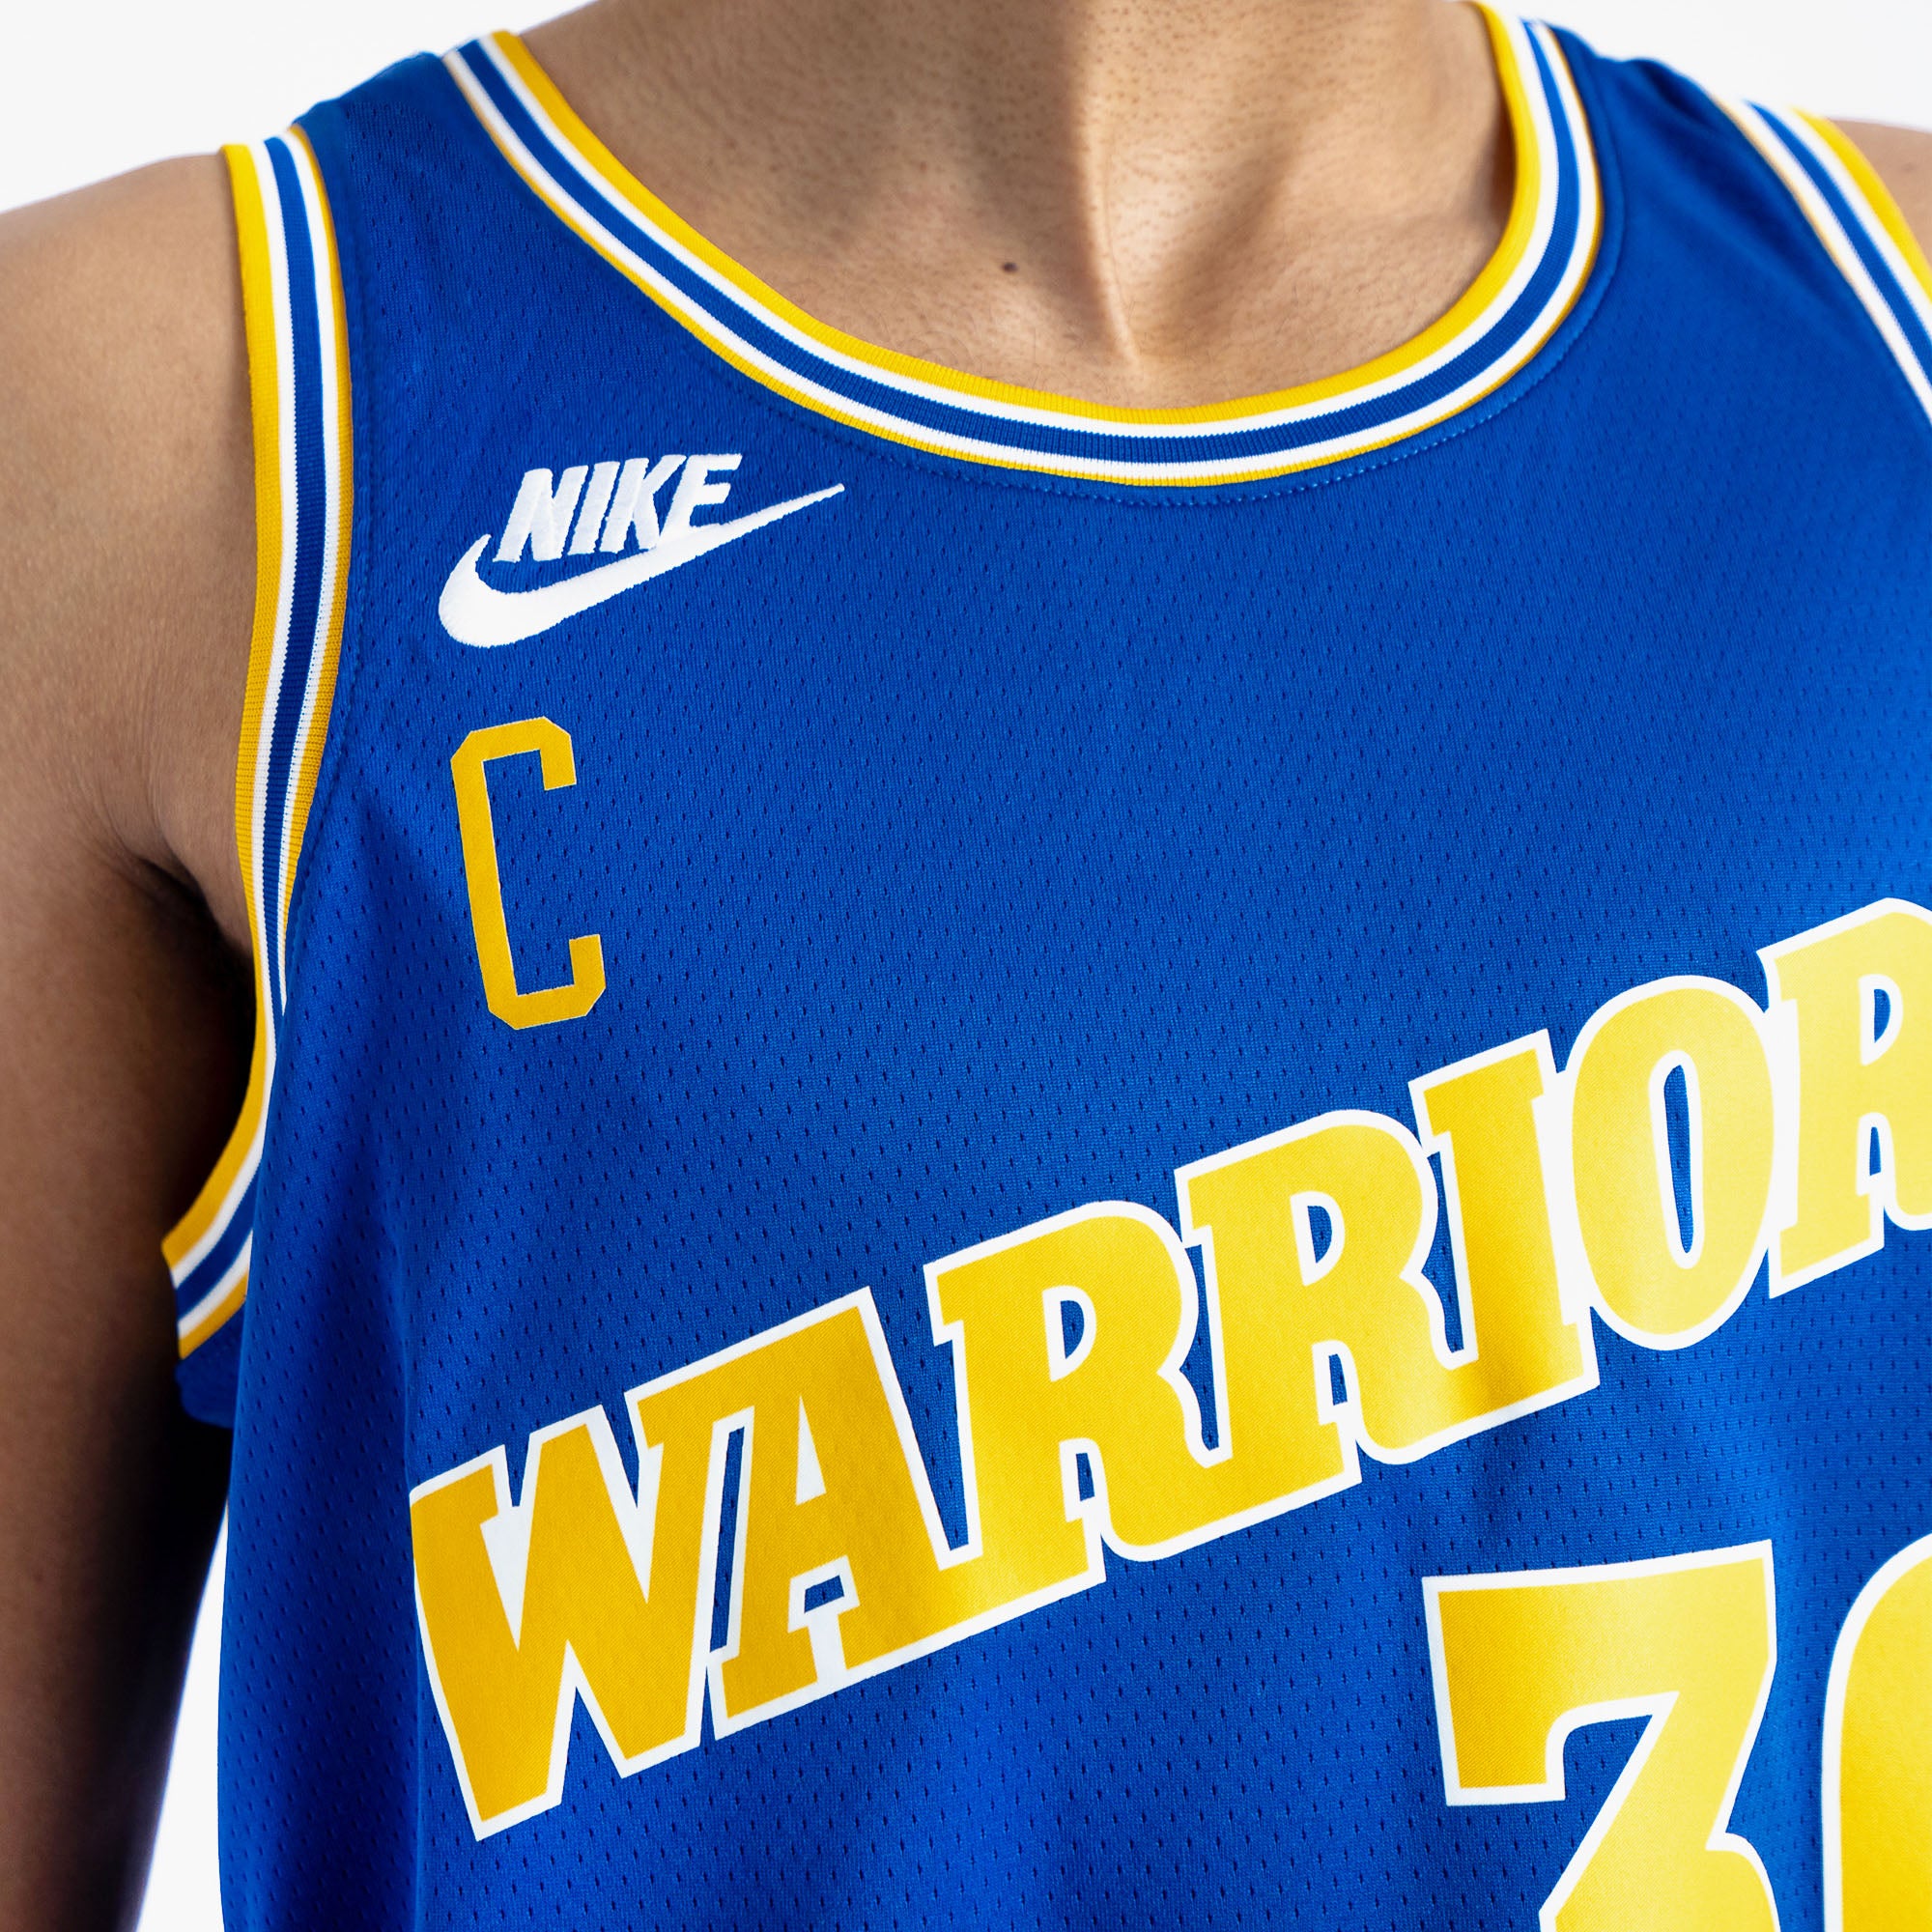 classic edition warriors jersey